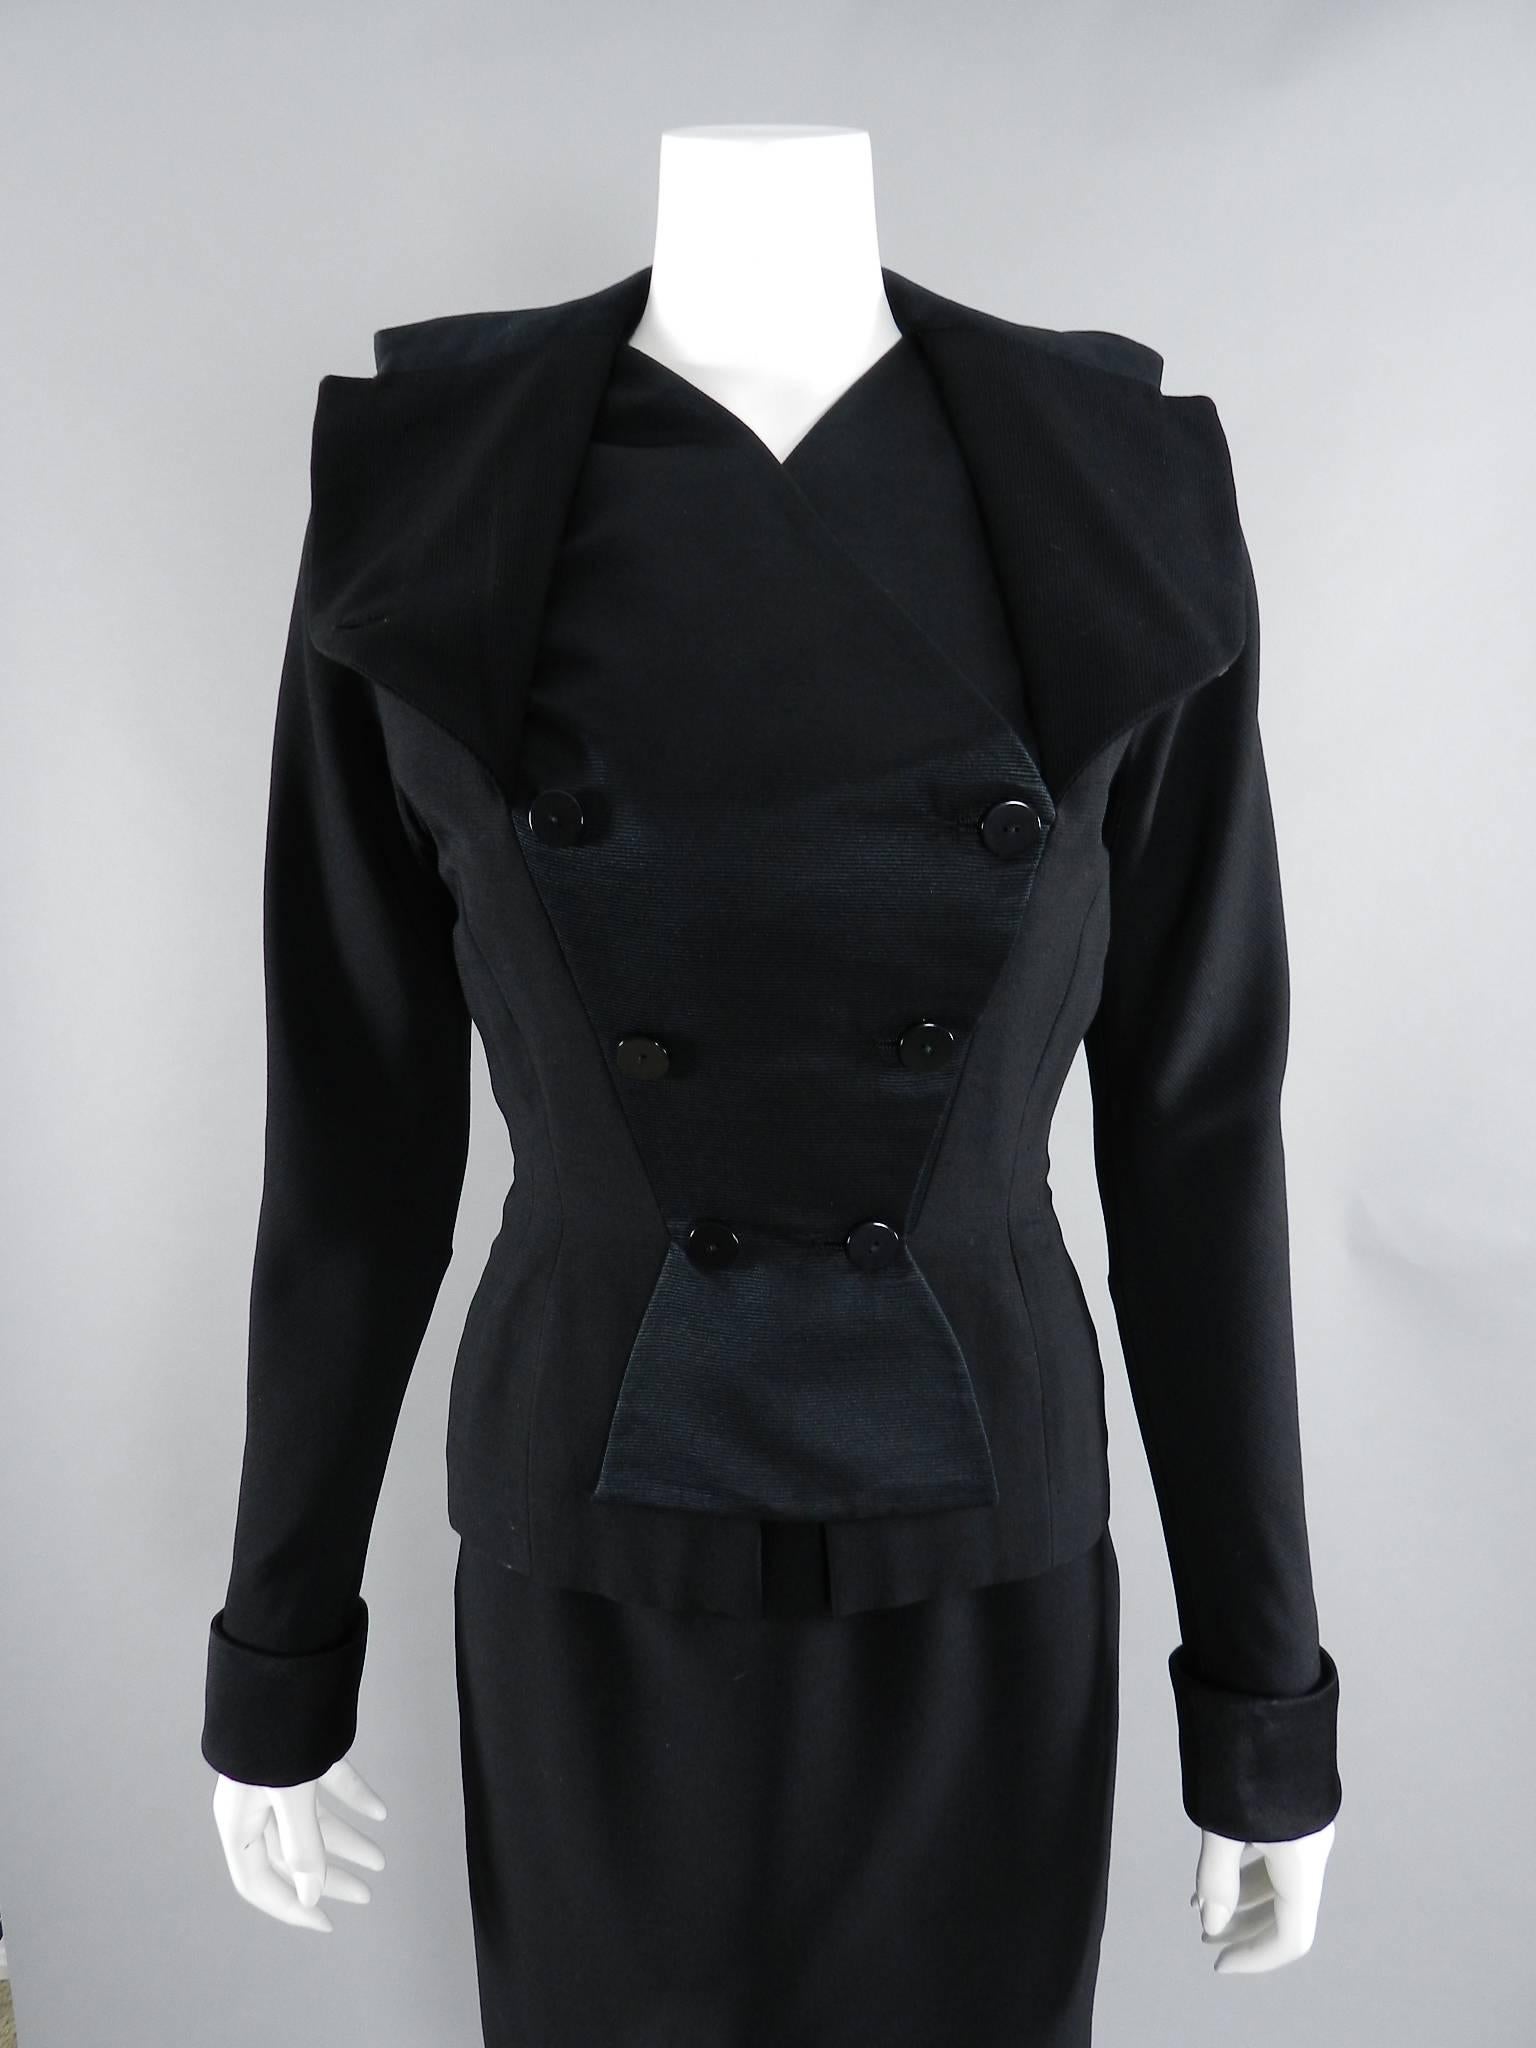 Pierre Balmain Black Silk Satin and Wool Skirt Suit, 1950s  For Sale 1